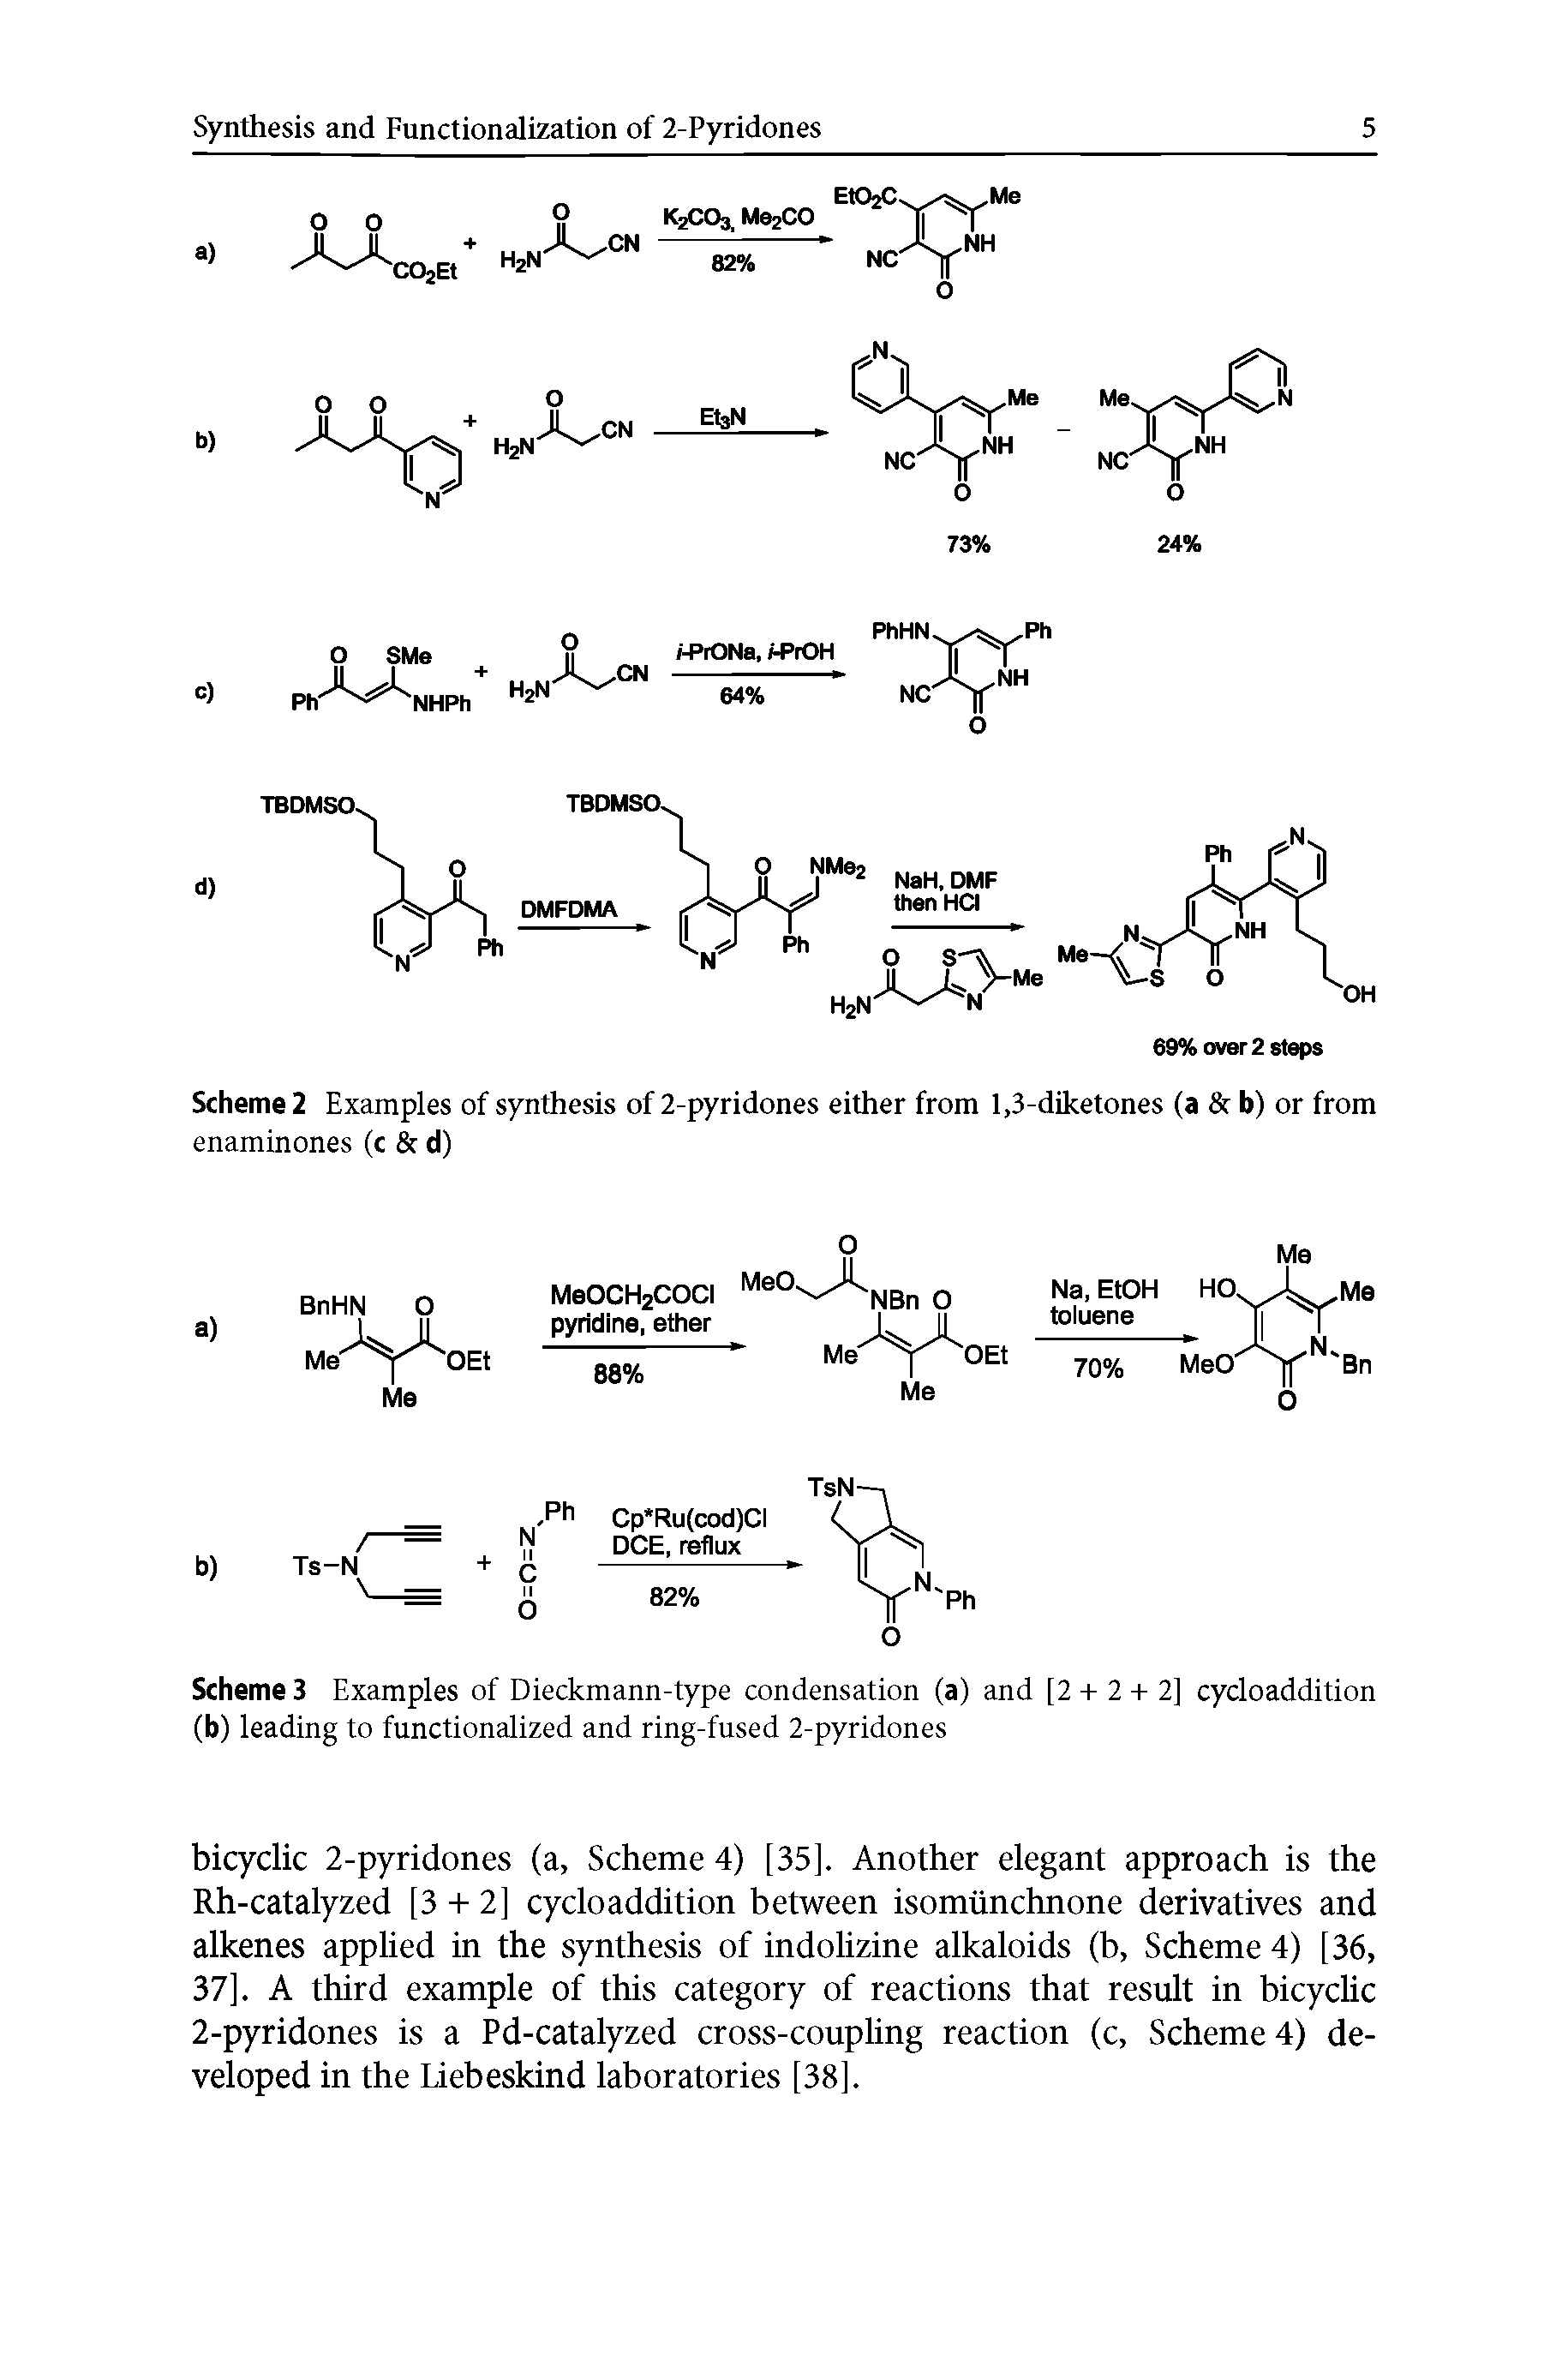 Scheme 3 Examples of Dieckmann-type condensation (a) and [2 + 2 + 2] cycloaddition (b) leading to functionalized and ring-fused 2-pyridones...